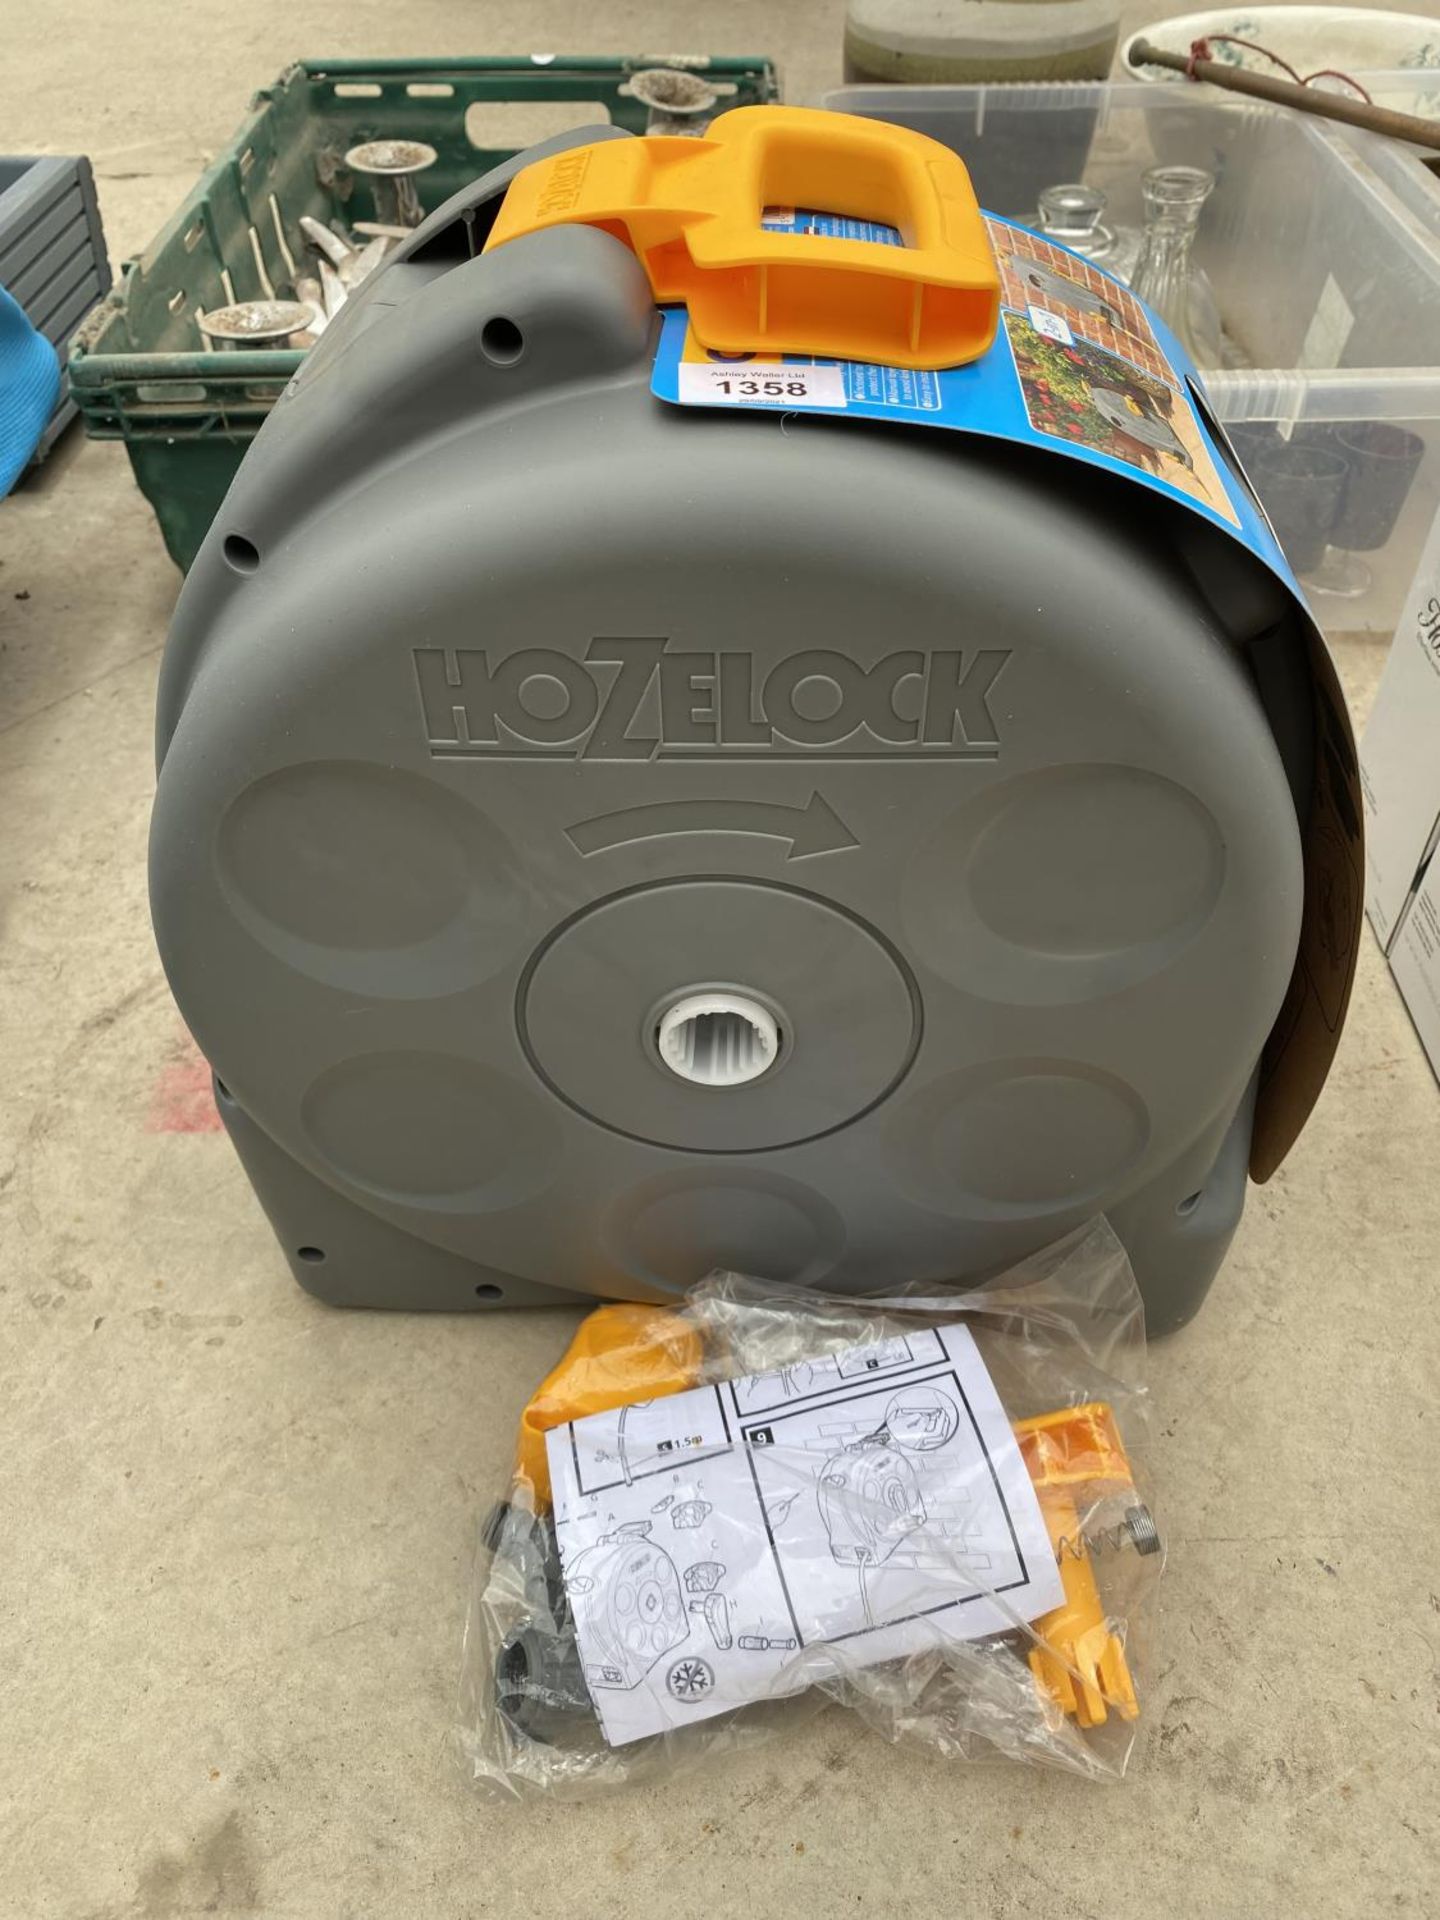 A HOZELOCK REEL AND FURTHER FITTINGS